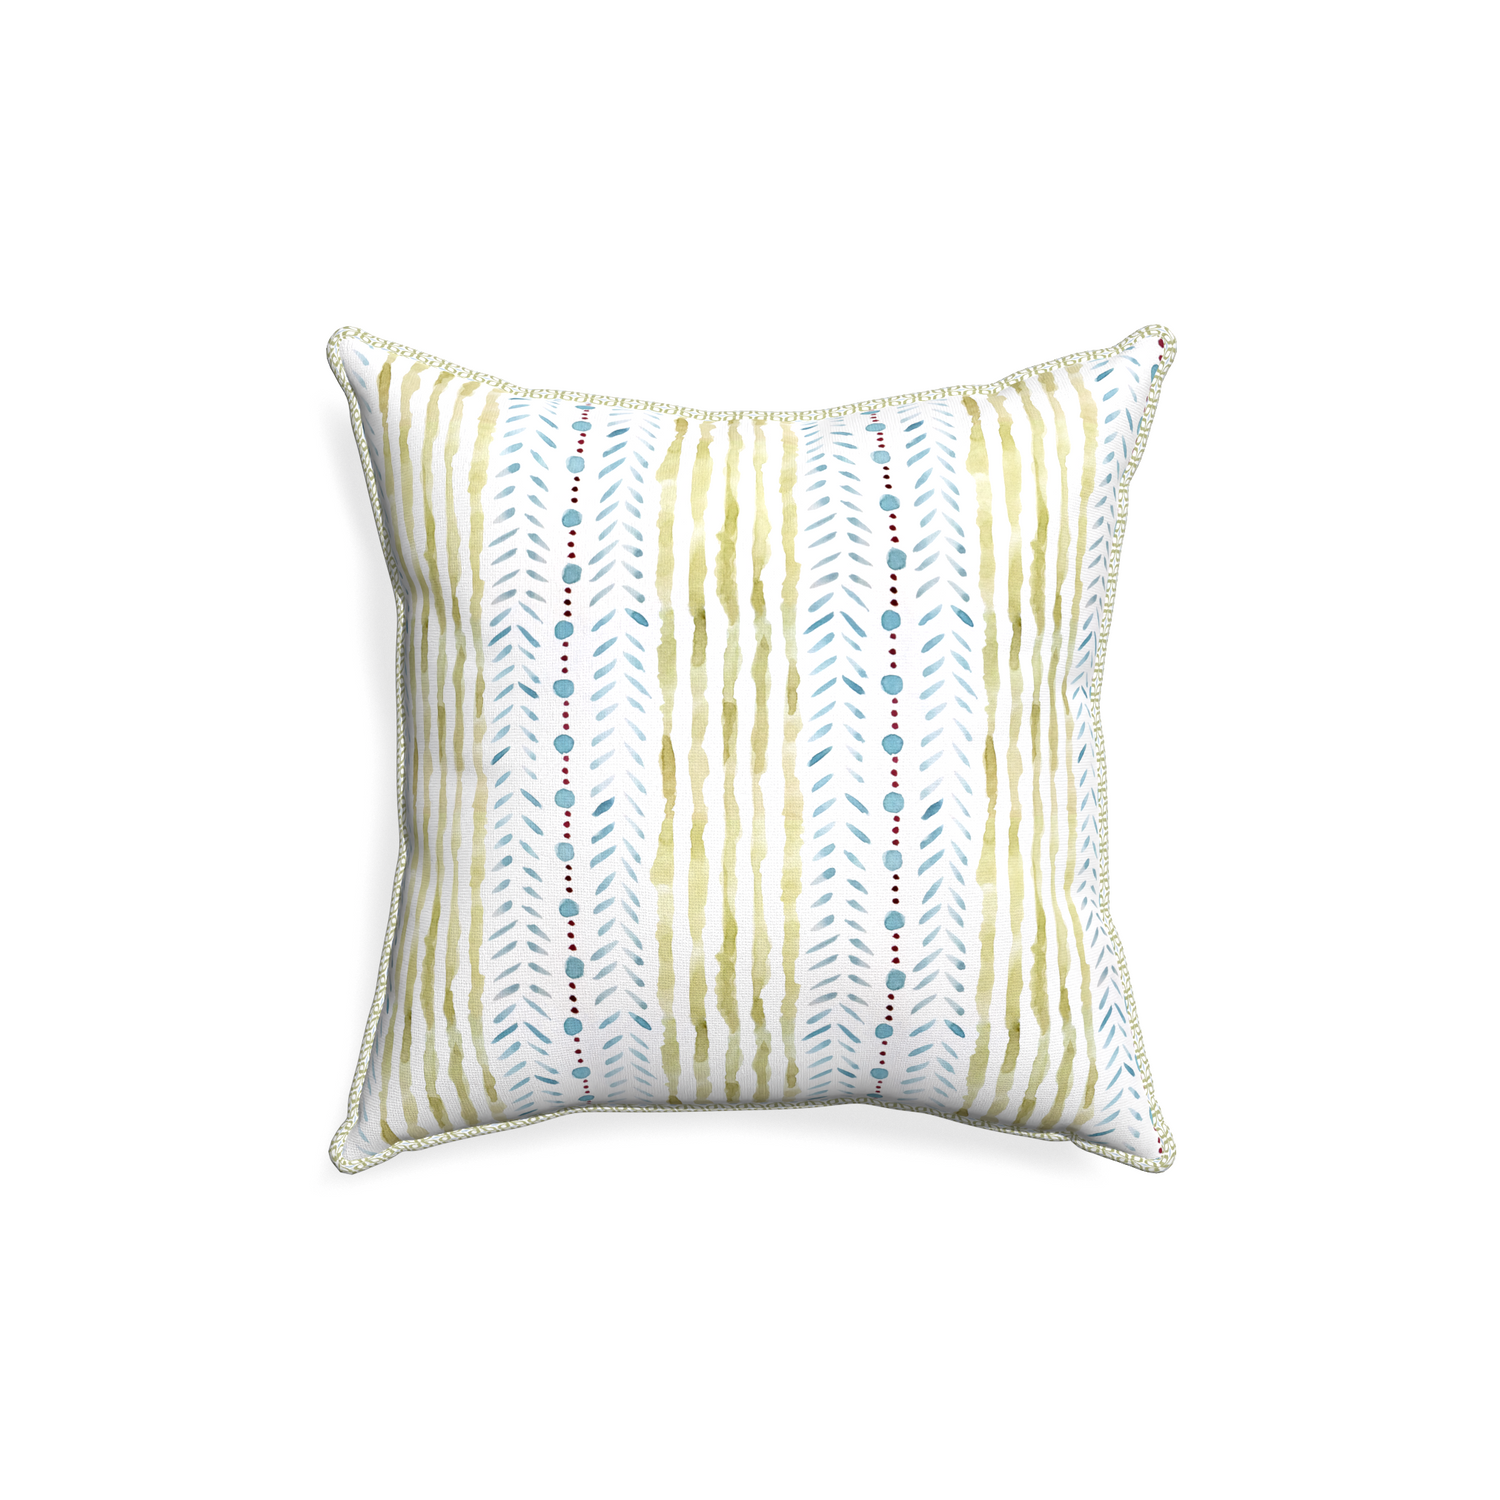 18-square julia custom pillow with l piping on white background